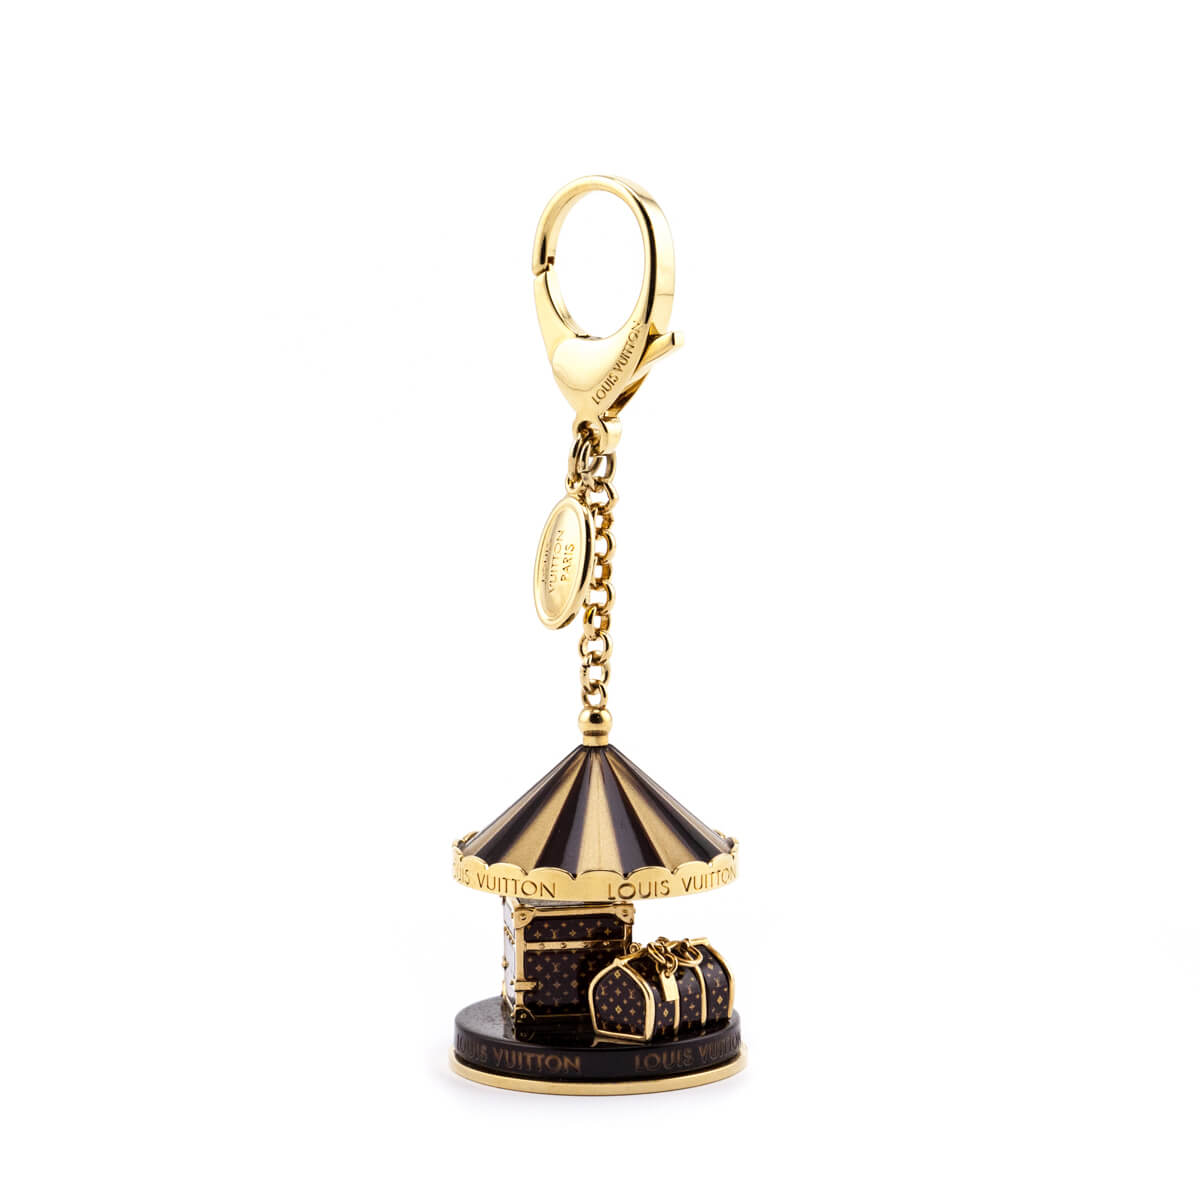 K&Co - Original Louis Vuitton accessories, bag pendant / keyring in the  shape of a smal